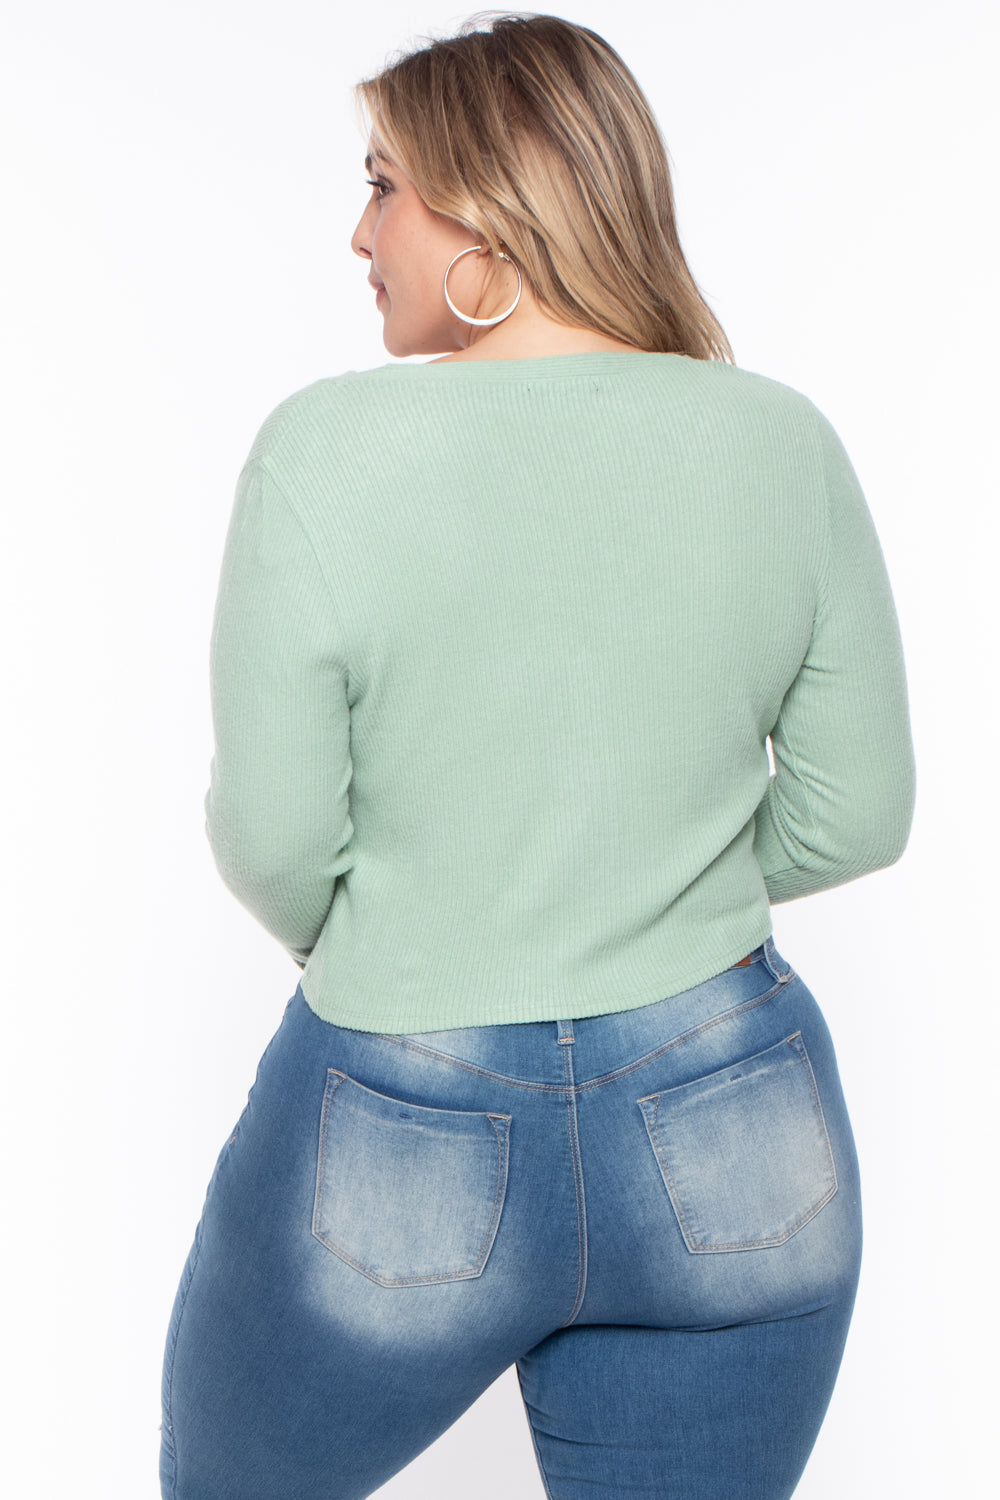 Ambiance Sweaters & Cardigans Plus Size Delaney Sweater - Sage